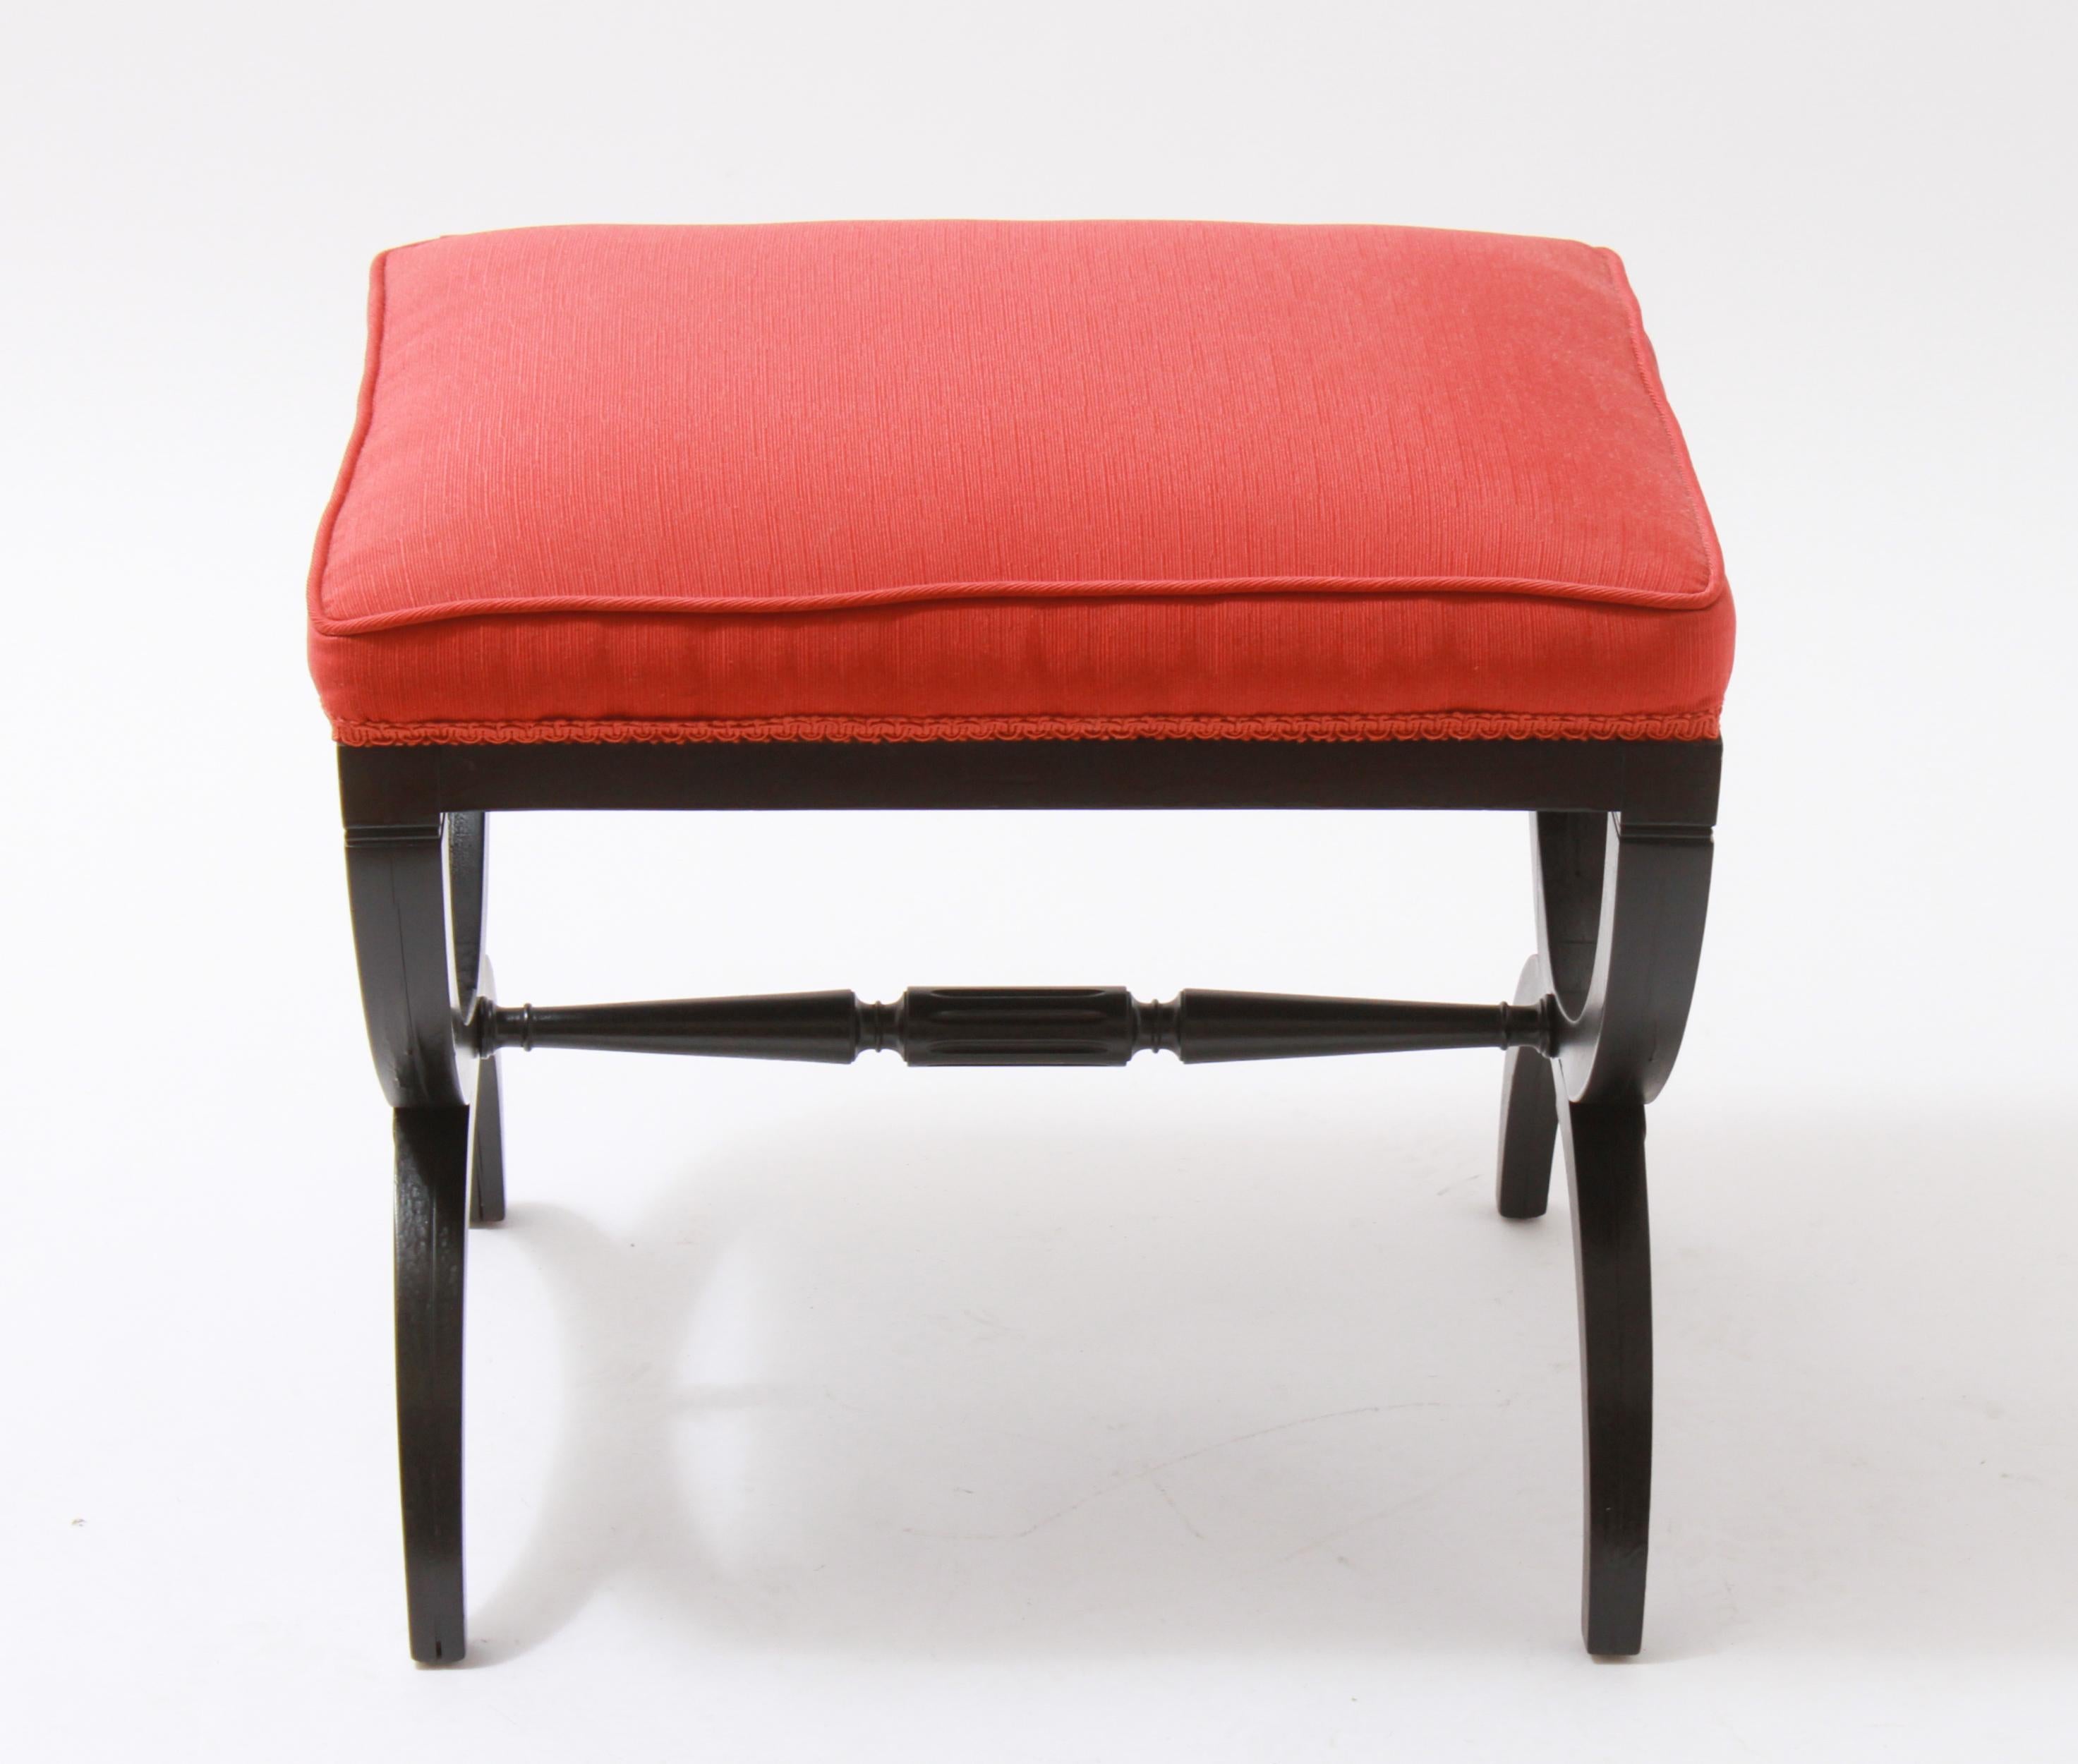 Mid-Century Modern demilune ottoman or stool, attributed to Widdicomb, with a black painted base and a turned fluted stretcher. Recently reupholstered in red upholstery. In good vintage condition with some age-related wear.